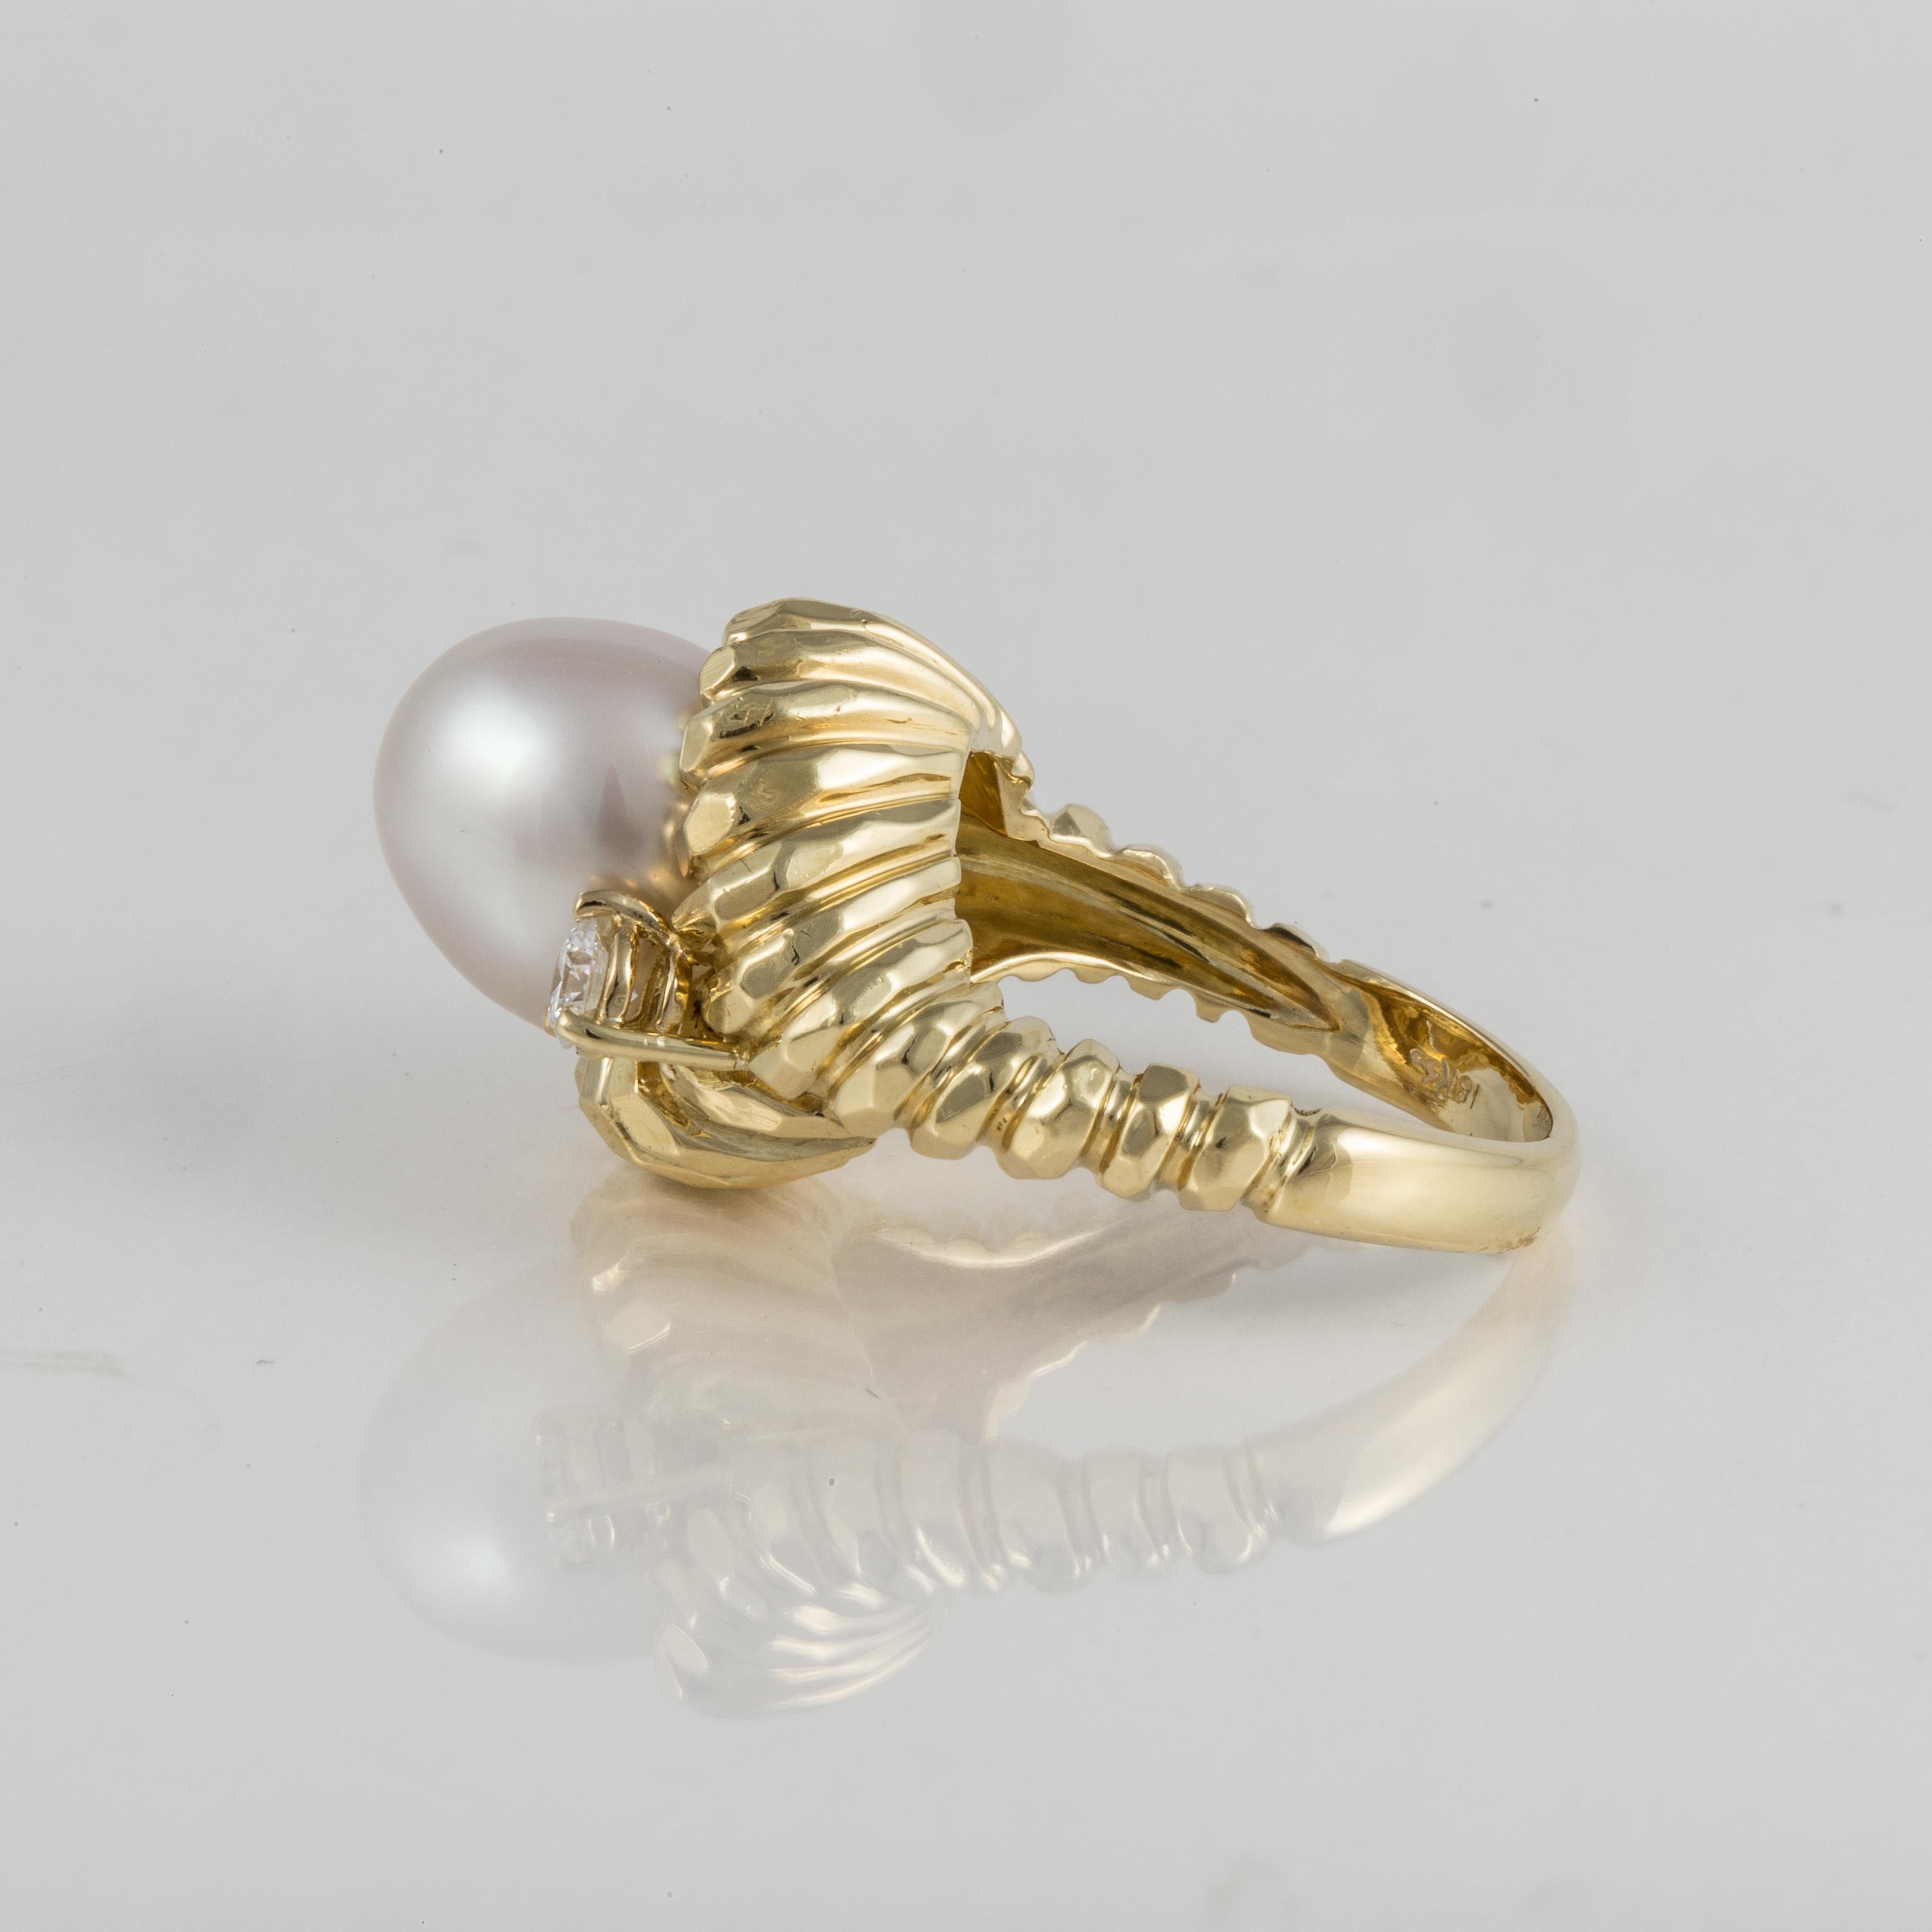 Henry Dunay ring in 18K yellow gold featuring a cultured pearl accented by round diamonds. The cultured pearl measures 10.7 mm by 12 mm.  The two round brilliant-cut diamonds total 0.40 carats; G-H color and VS clarity.  The presentation area